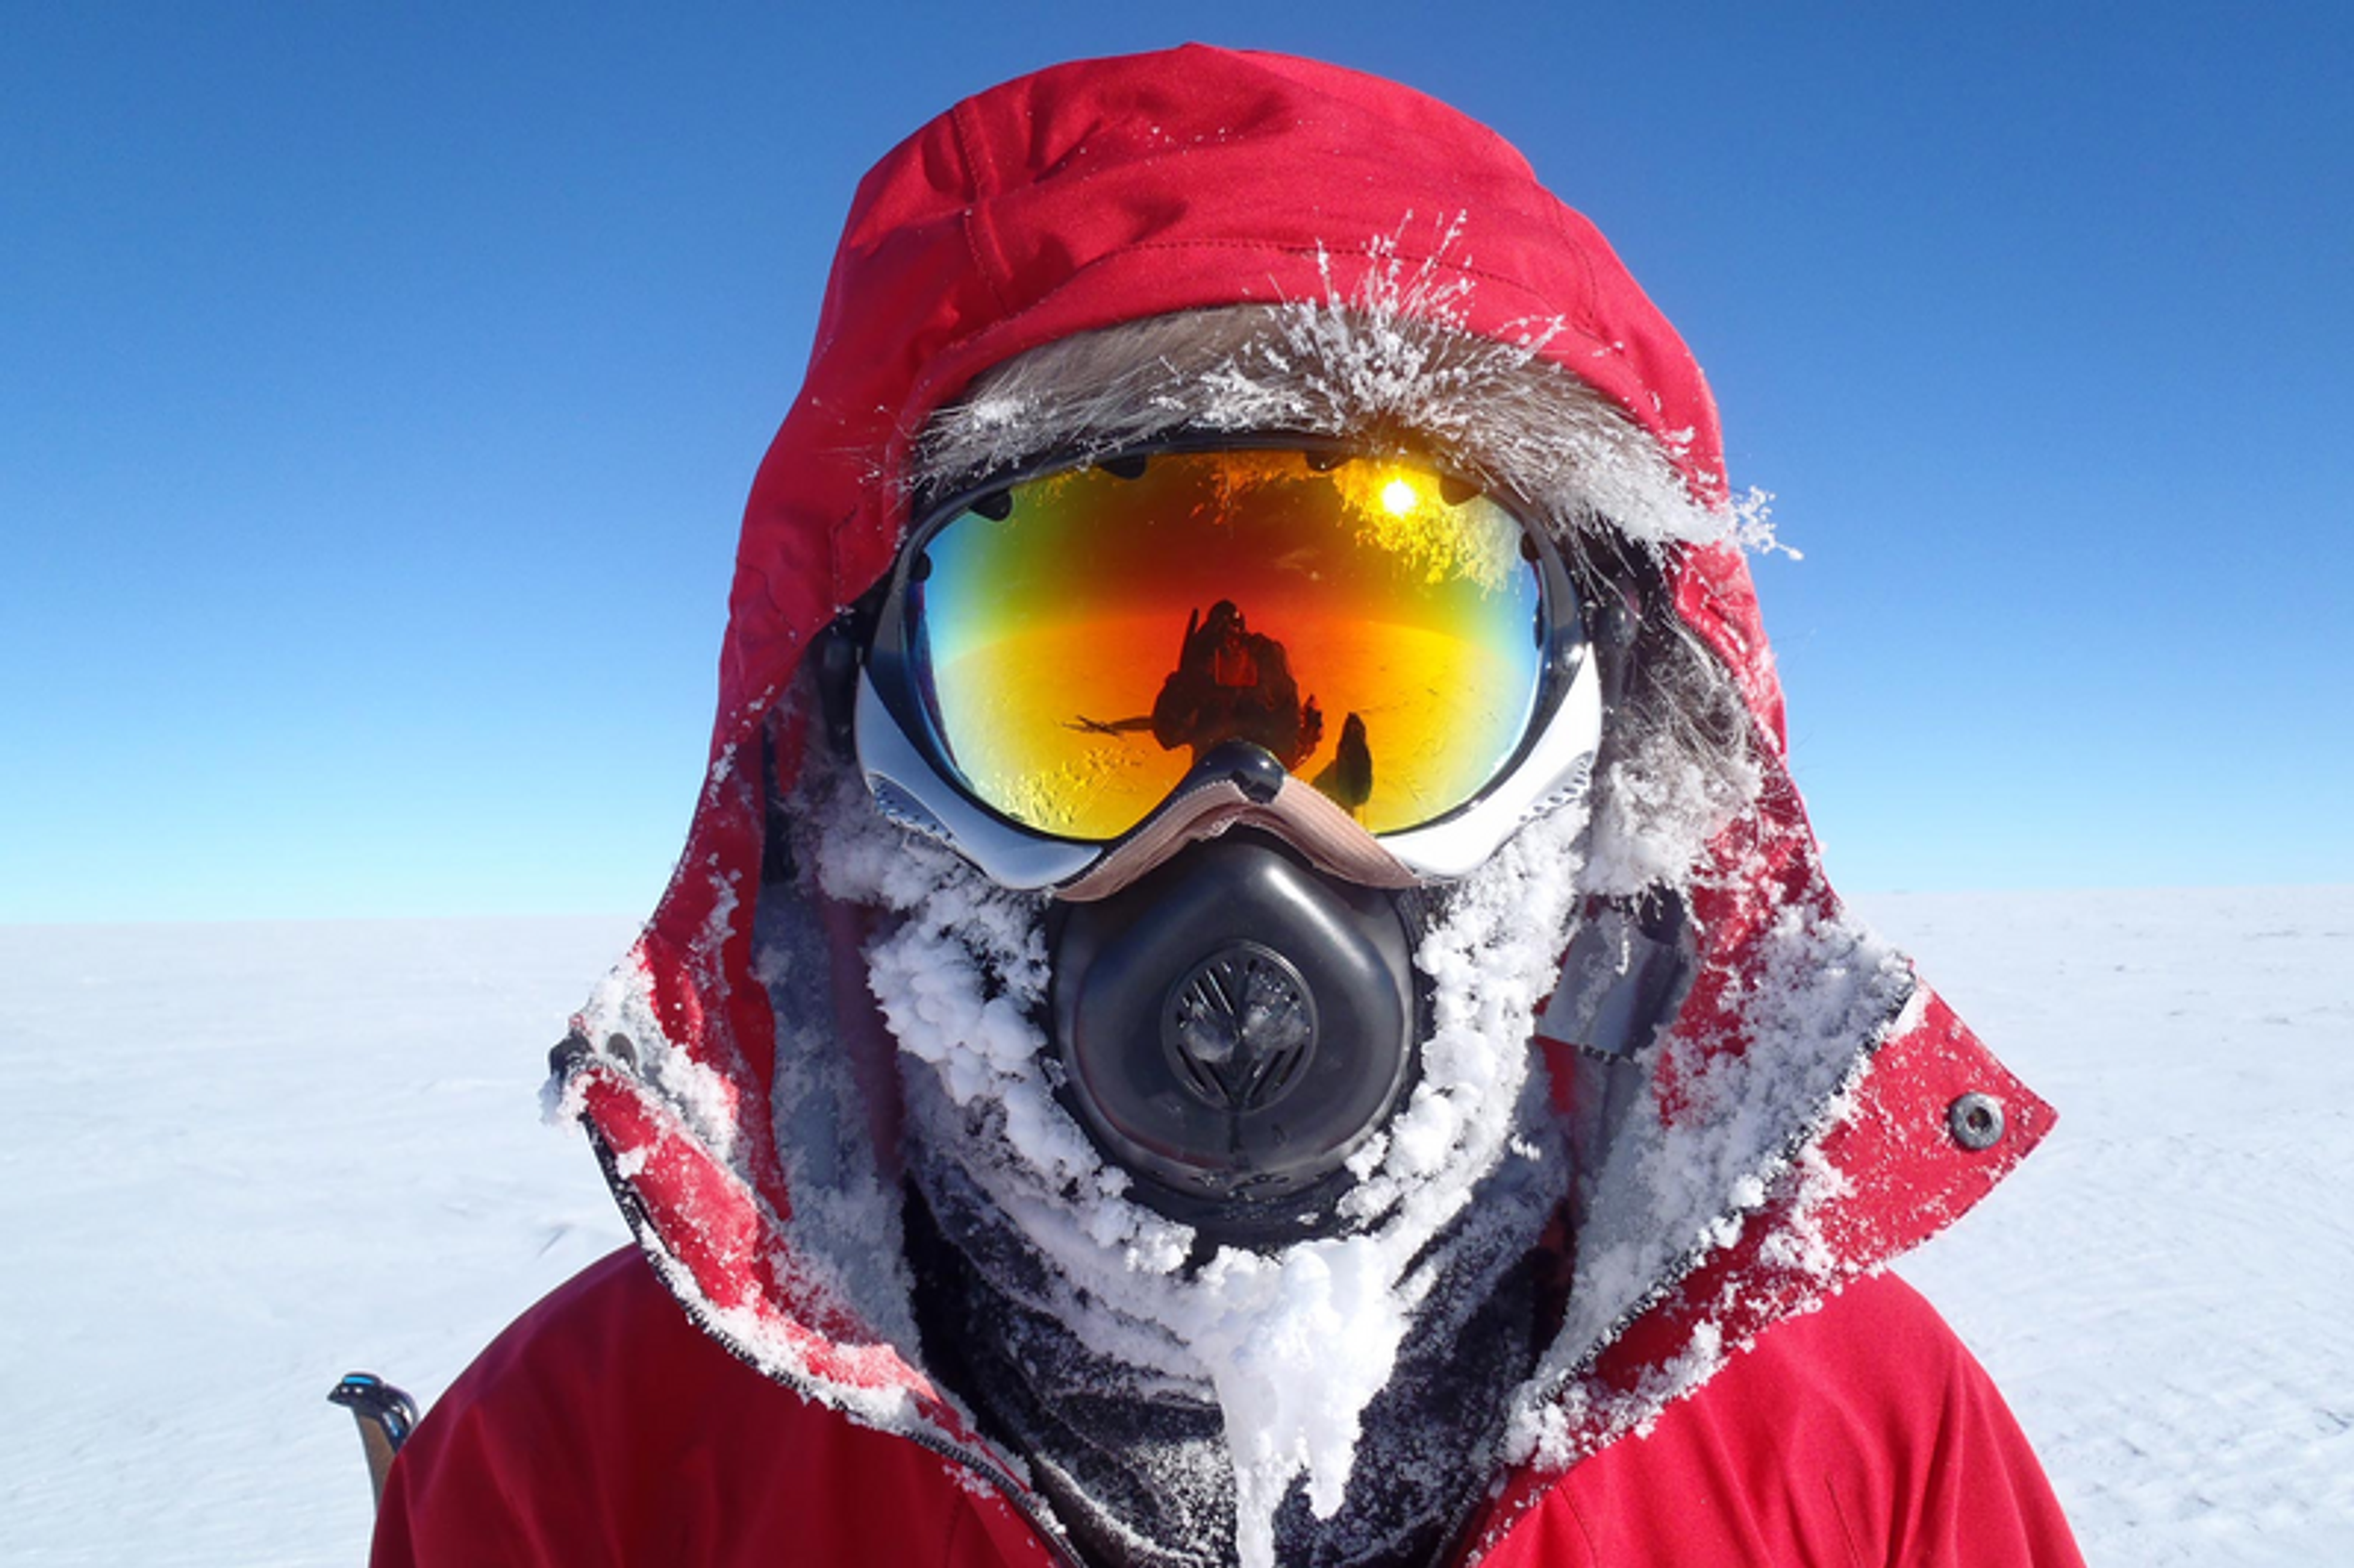 Person wearing a red hooded parka and a full-face ski mask, covered in snow and ice, braving the cold elements.